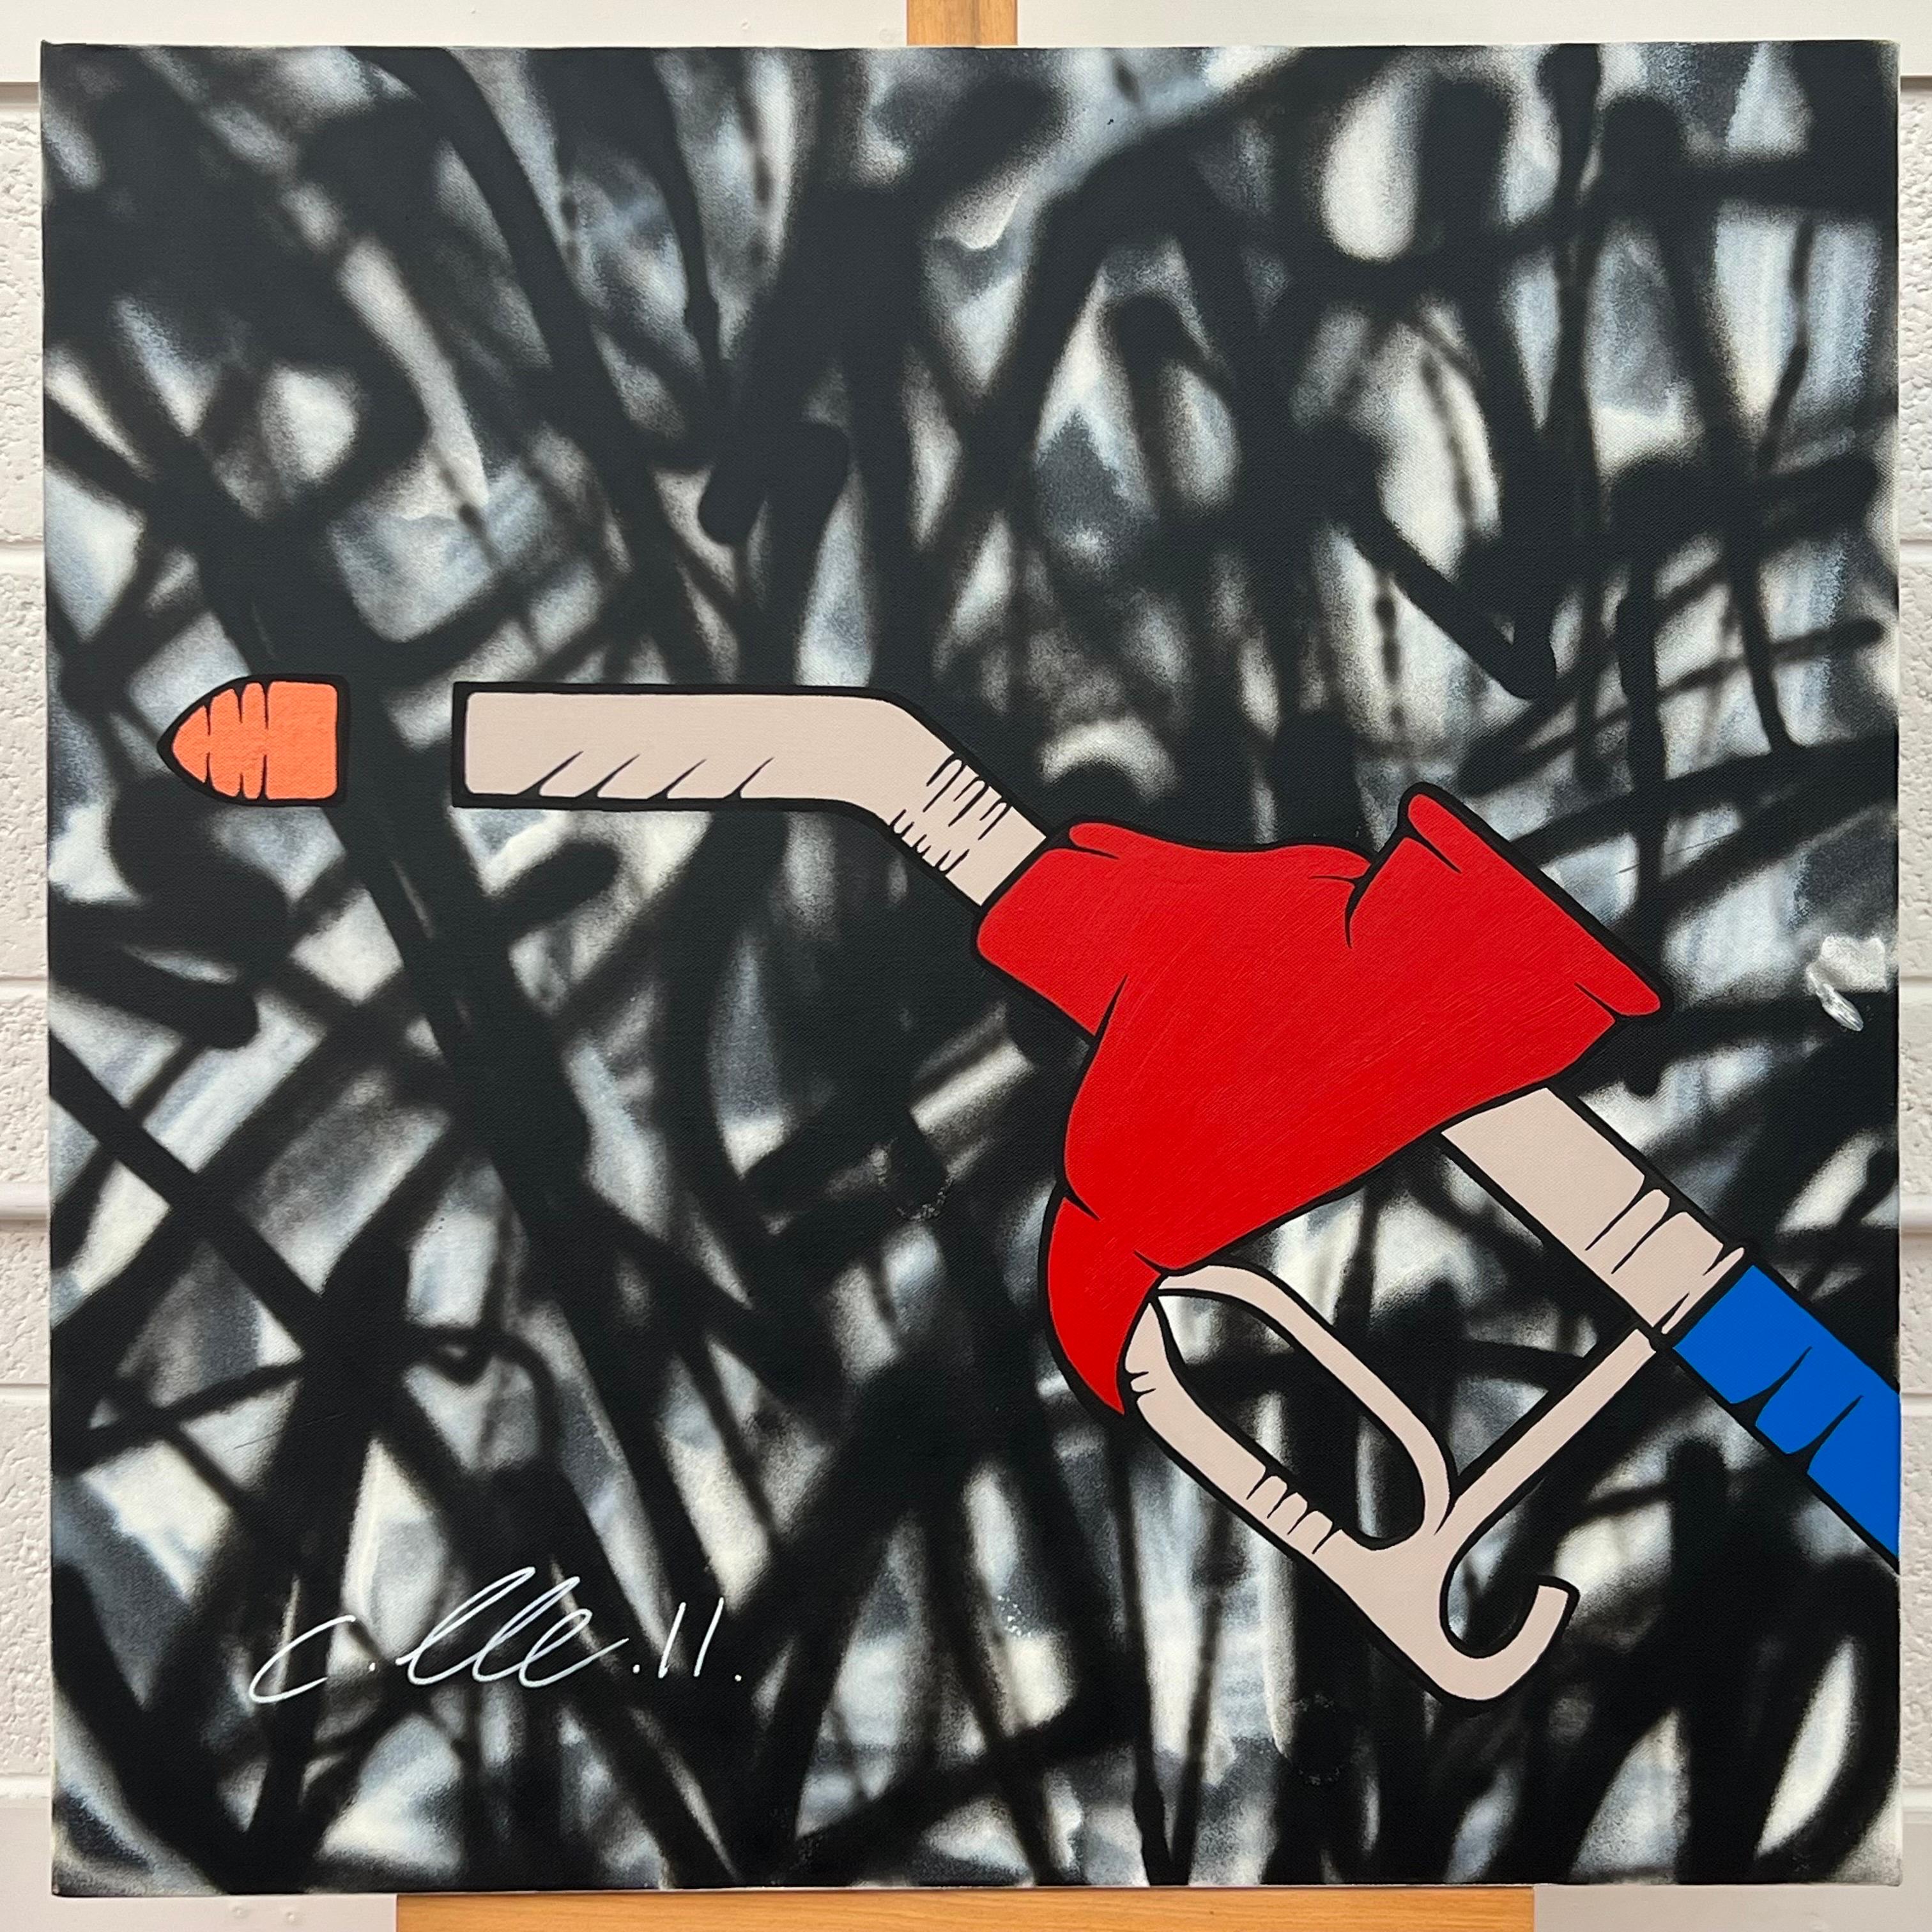 Oil Gas Fuel Pump Pop Art on Abstract Background by British Graffiti Artist - Painting by Chris Pegg